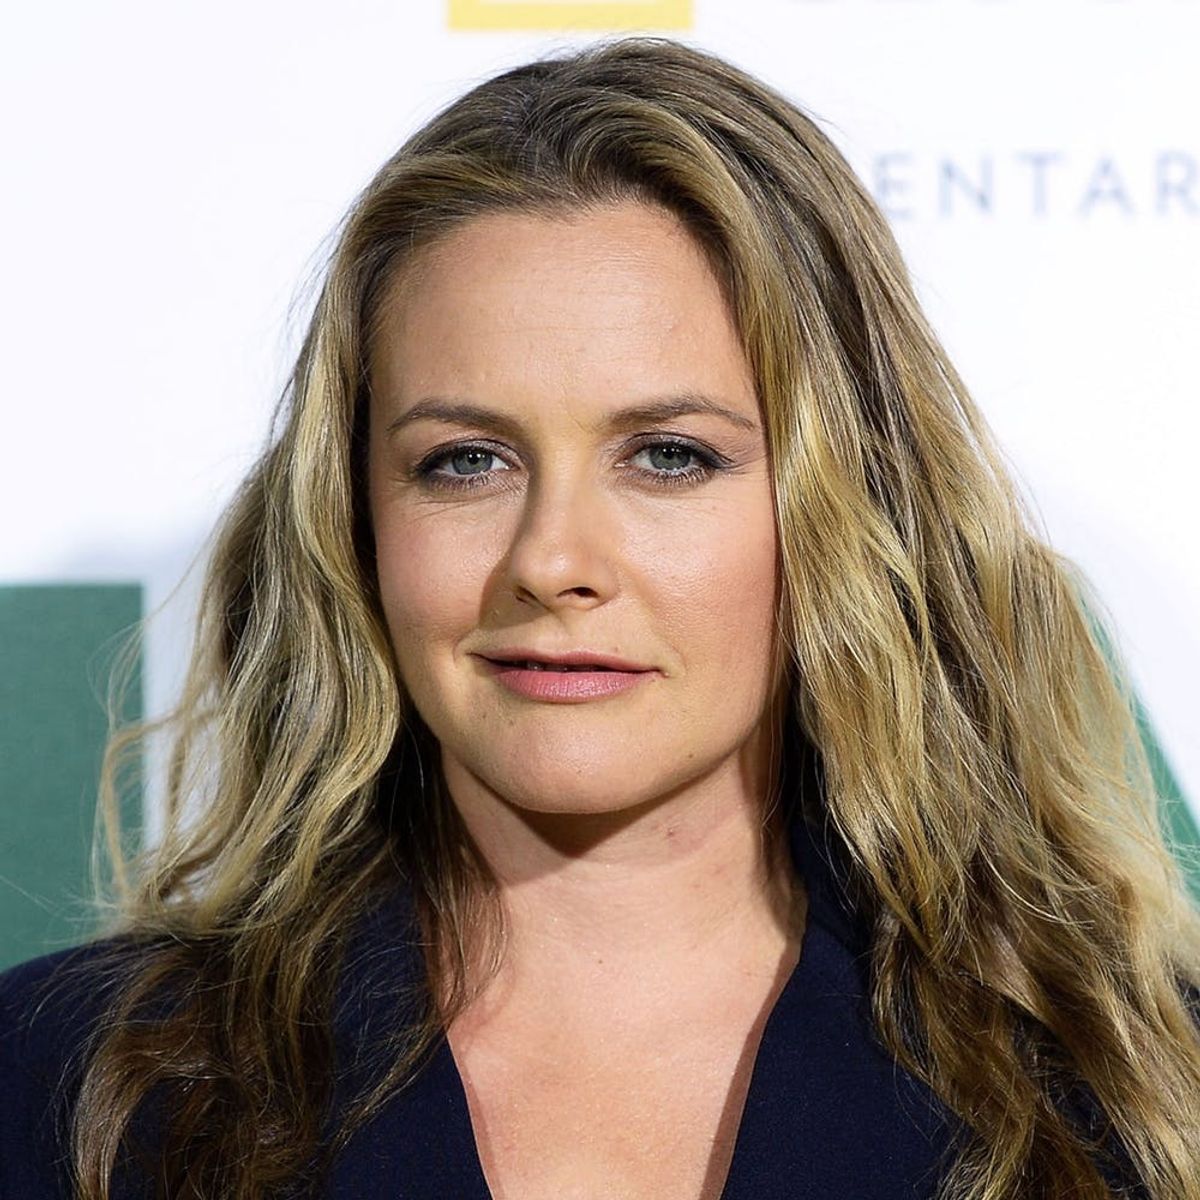 Alicia Silverstone Just Won Halloween by Dressing Up As Cher Horowitz